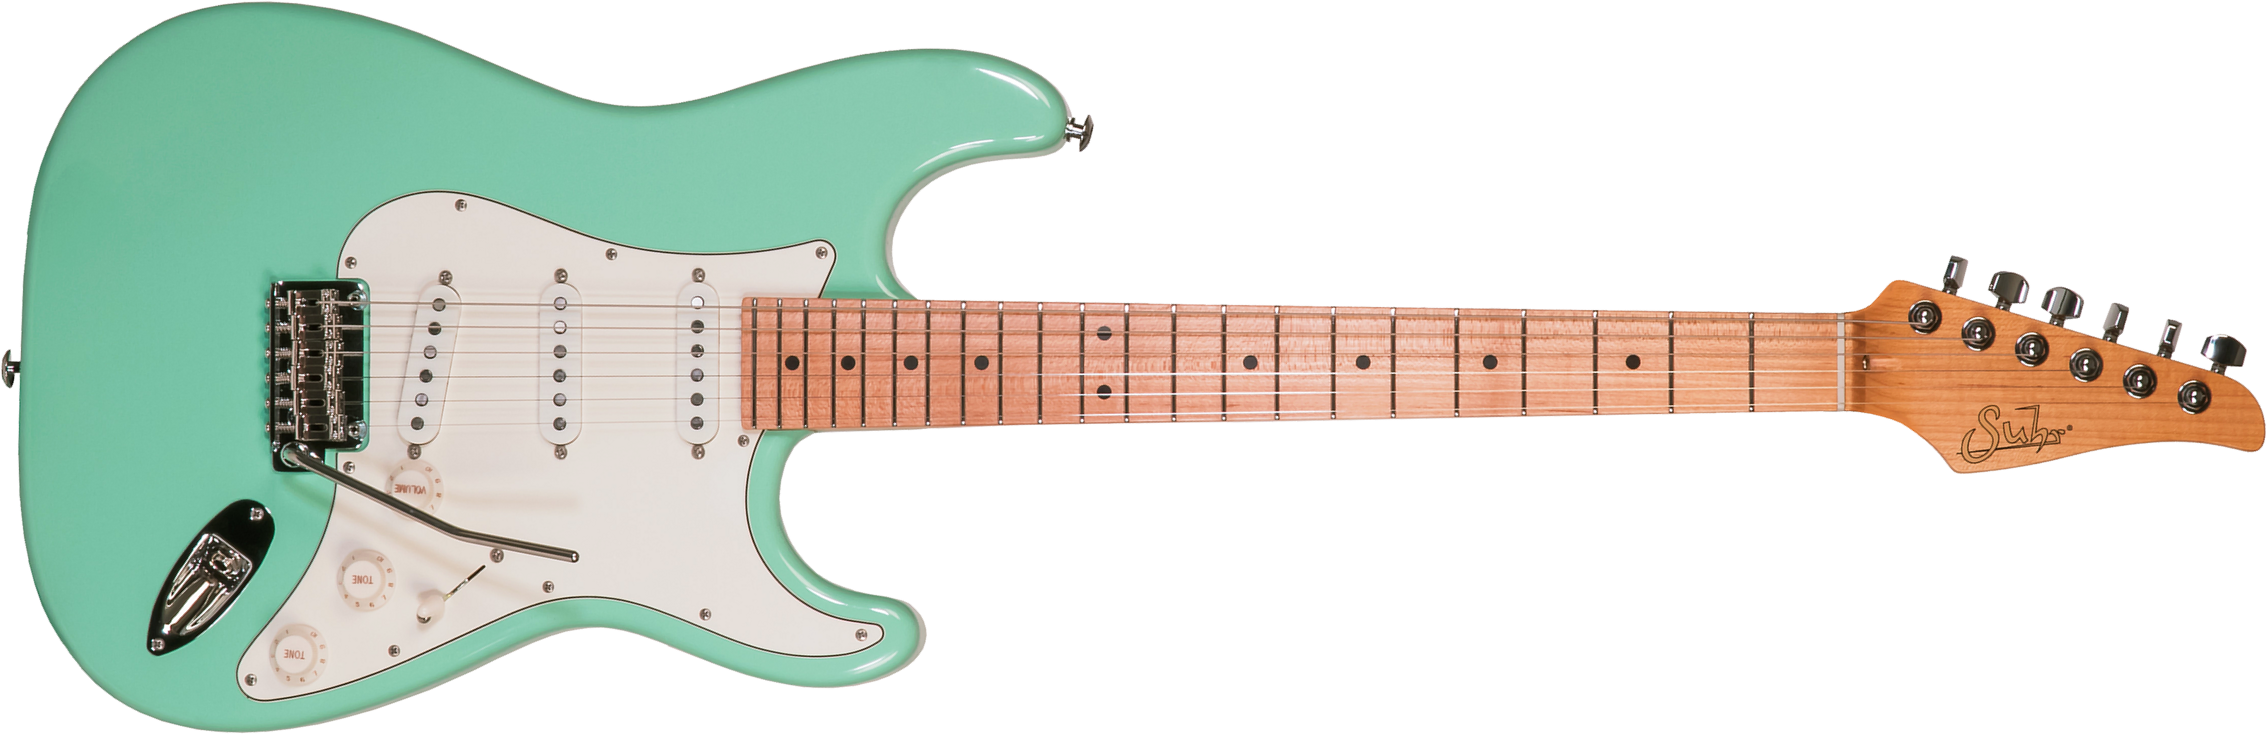 Suhr Classic S Antique Sss 01-csa-0020 3s Trem Mn #71418 - Light Aging Surf Green - Str shape electric guitar - Main picture